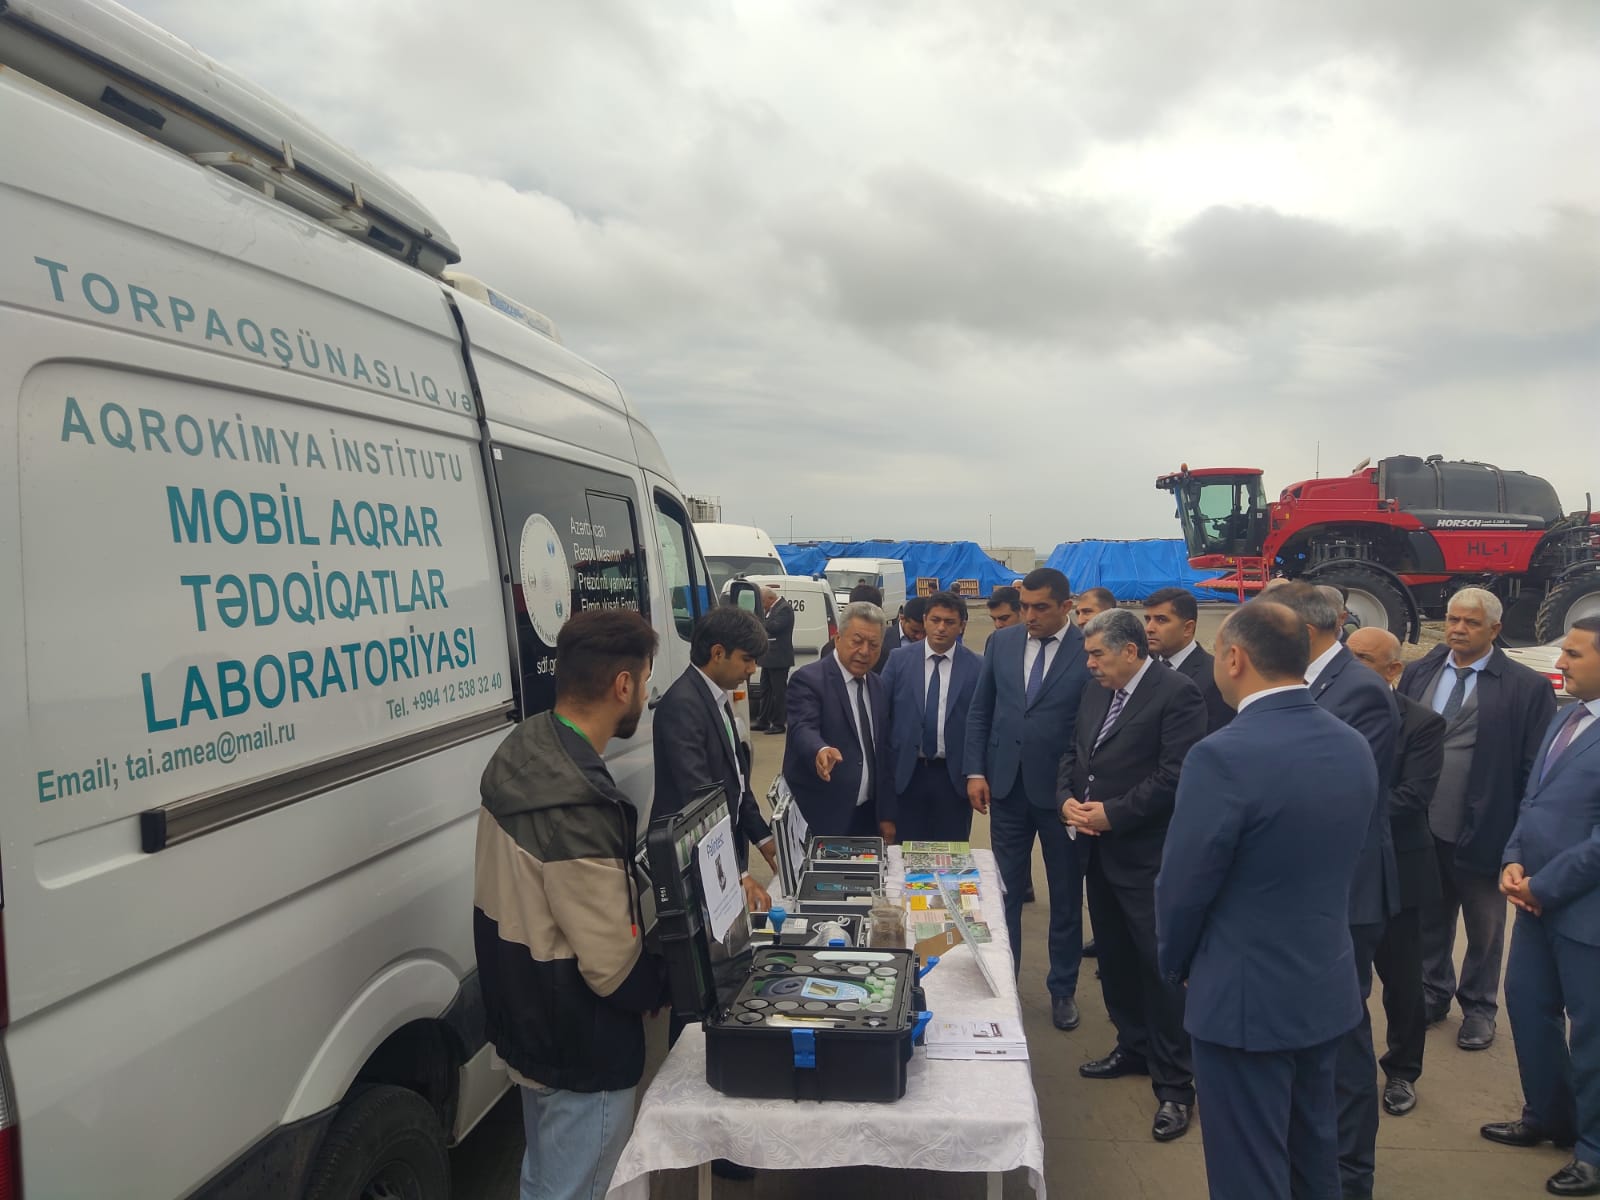 The Institute of Soil Science and Agrochemistry of the Ministry of Science and Education of the Republic of Azerbaijan participated in the Agrarian Innovation Festival held in Hajigabul district.